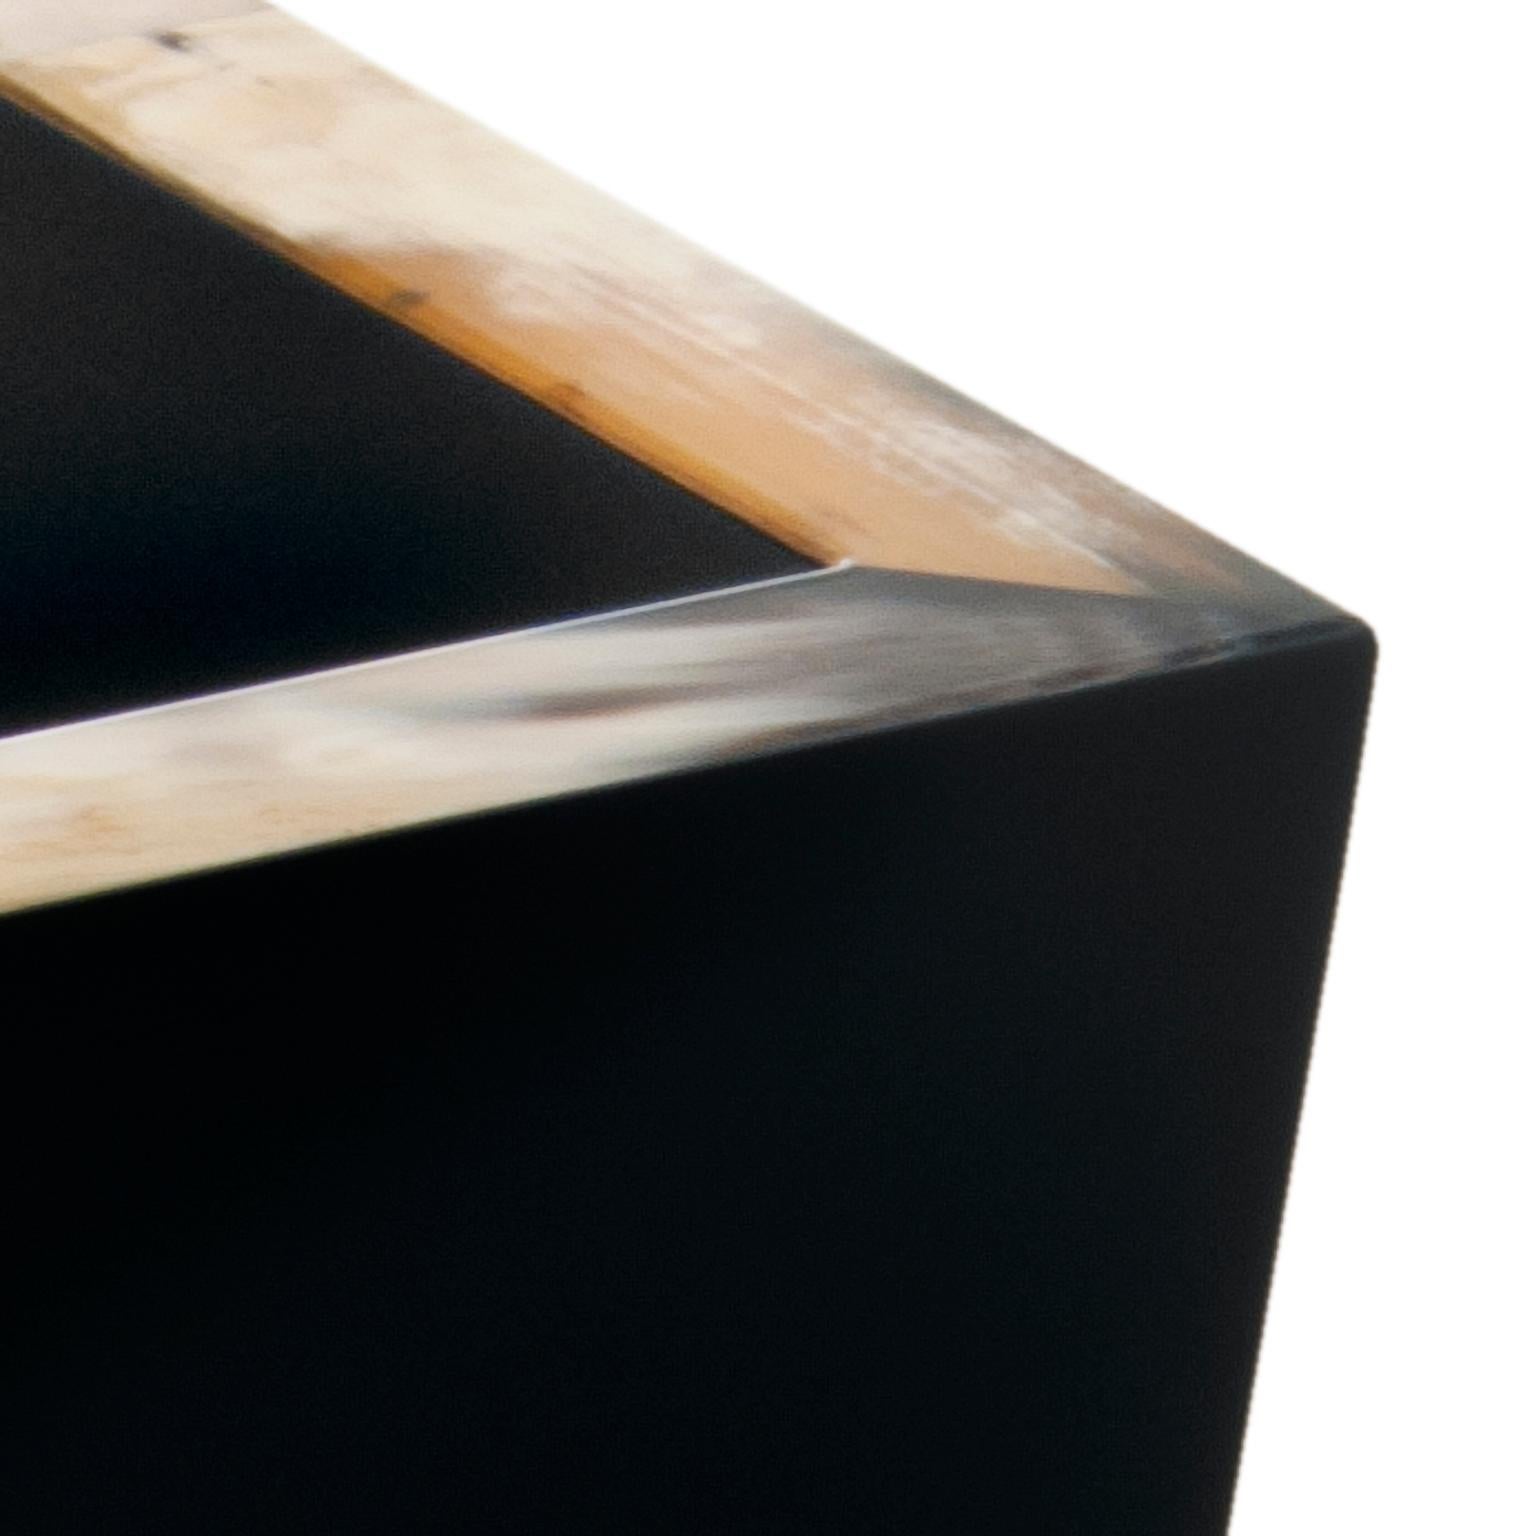 Polished Fedro Waste Paper Basket in Corno Italiano and Black Lacquered Wood, Mod. 1956 For Sale